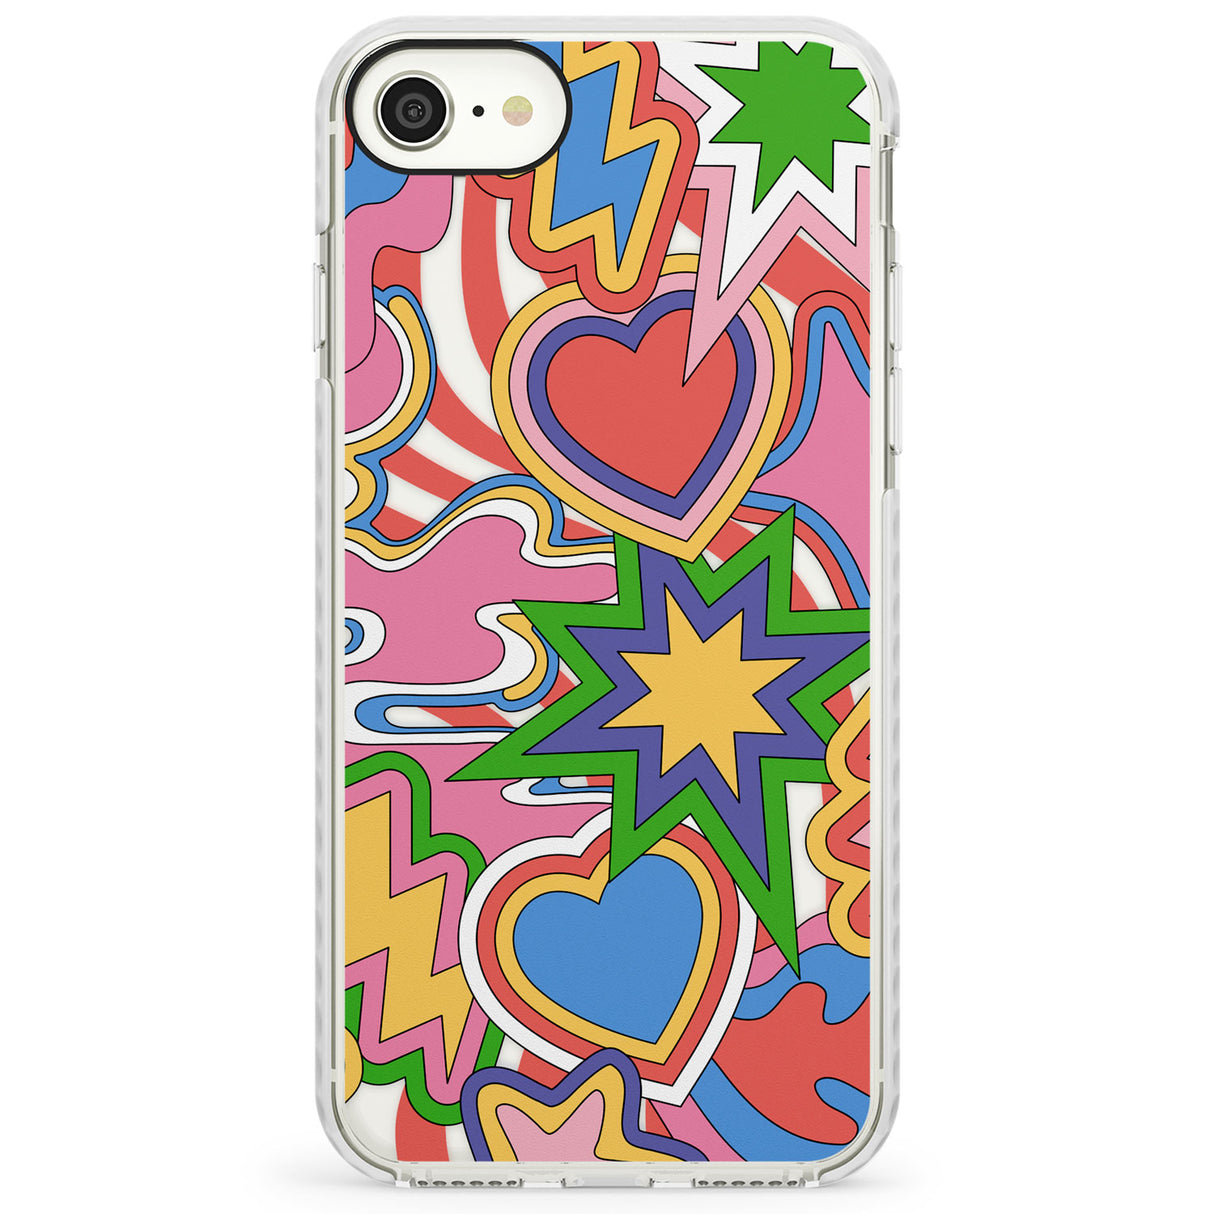 Psychedelic Pop Art ExplosionImpact Phone Case for iPhone SE